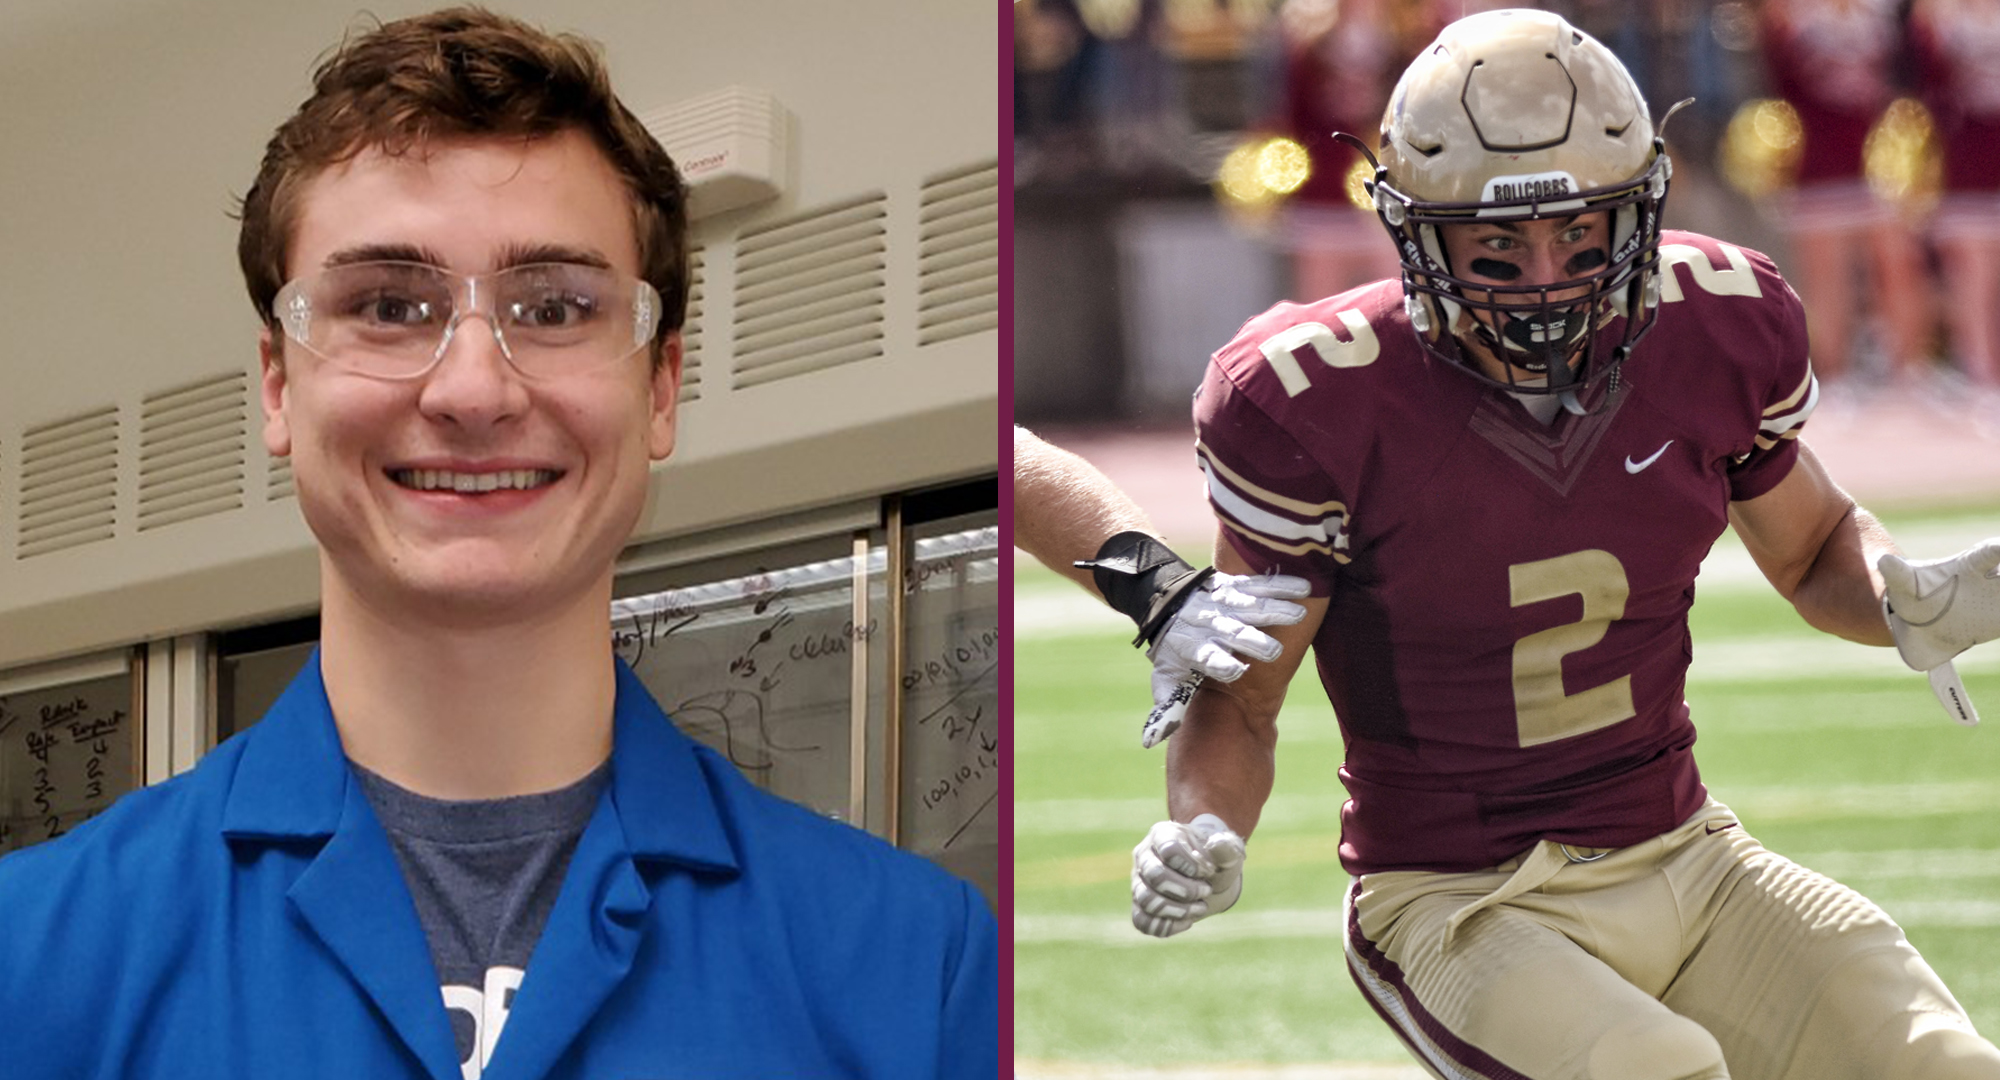 Maison Grefe ’20, who spent the 2020 spring semester conducting biomedical research as an intern for the Scripps Institute in Jupiter, Fla., earned MIAC postseason honors last year for the Cobber football team.